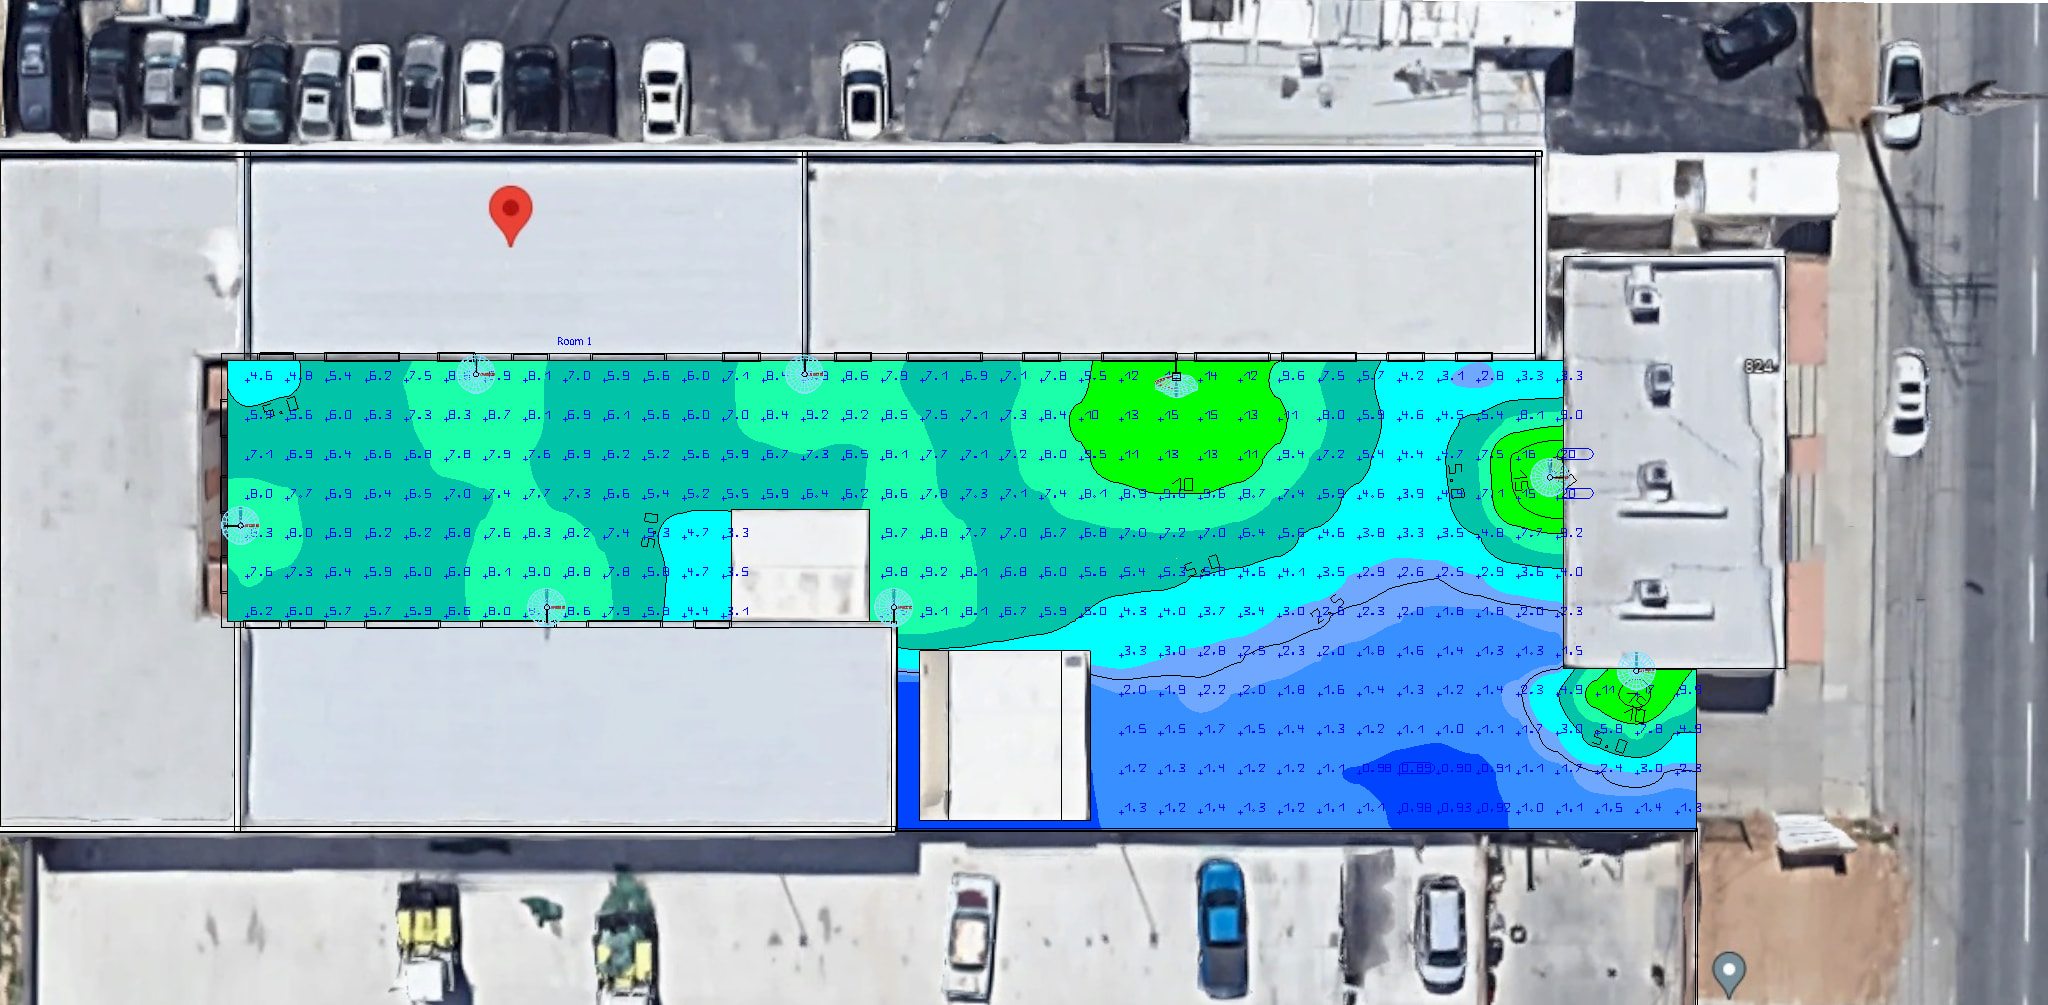 3D model showing a overhead view of LED area lights illuminating an outside storage facility